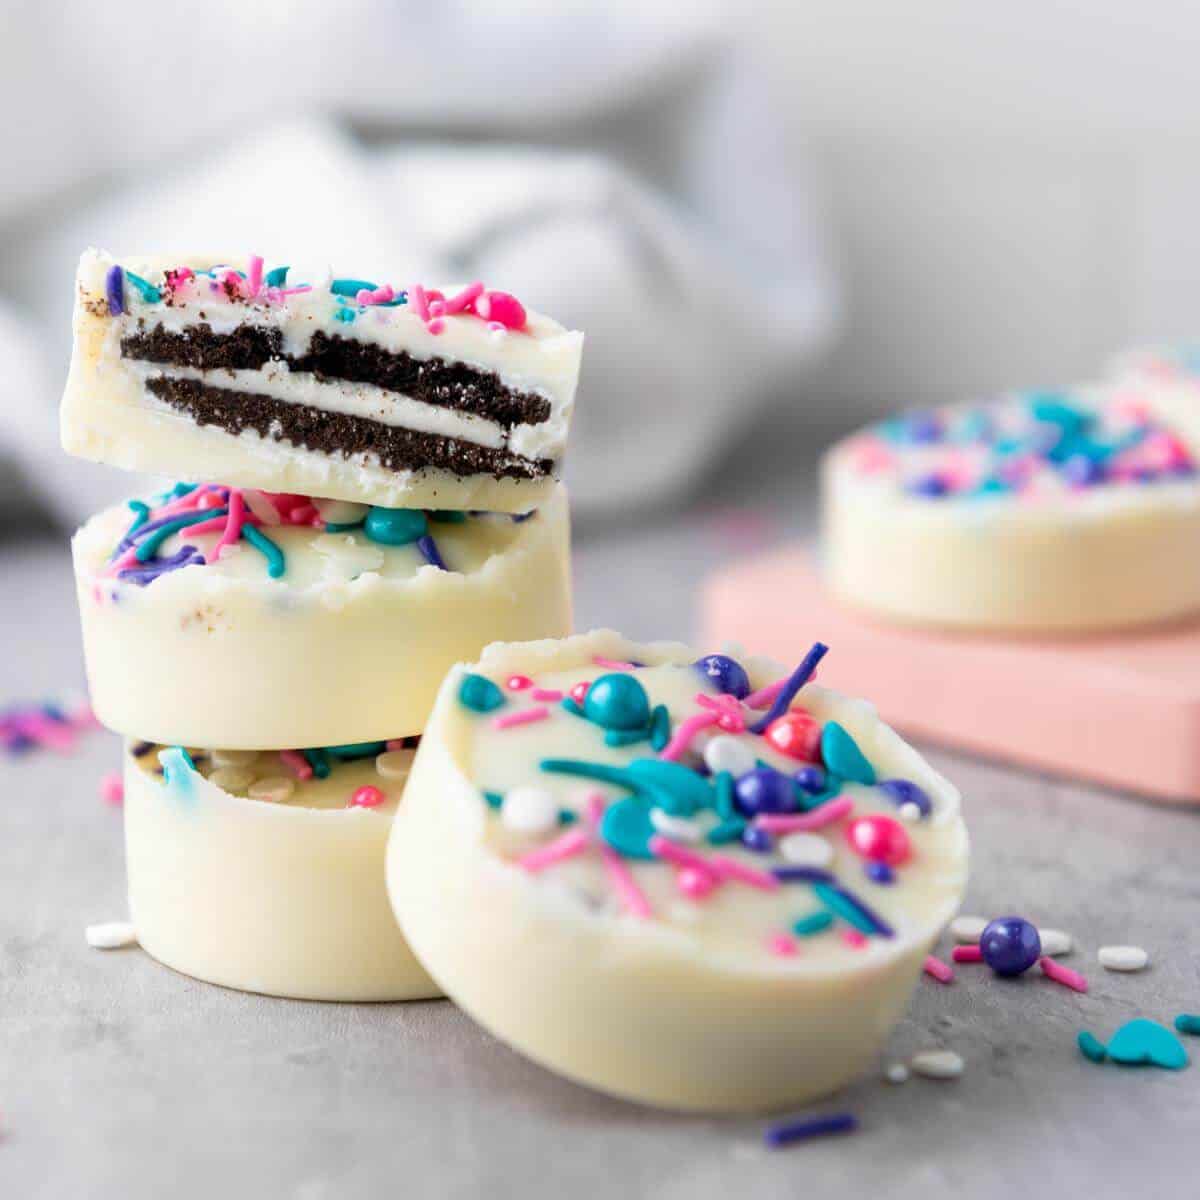 Four chocolate white chocolate covered Oreos stacked and covered in colorful sprinkles.